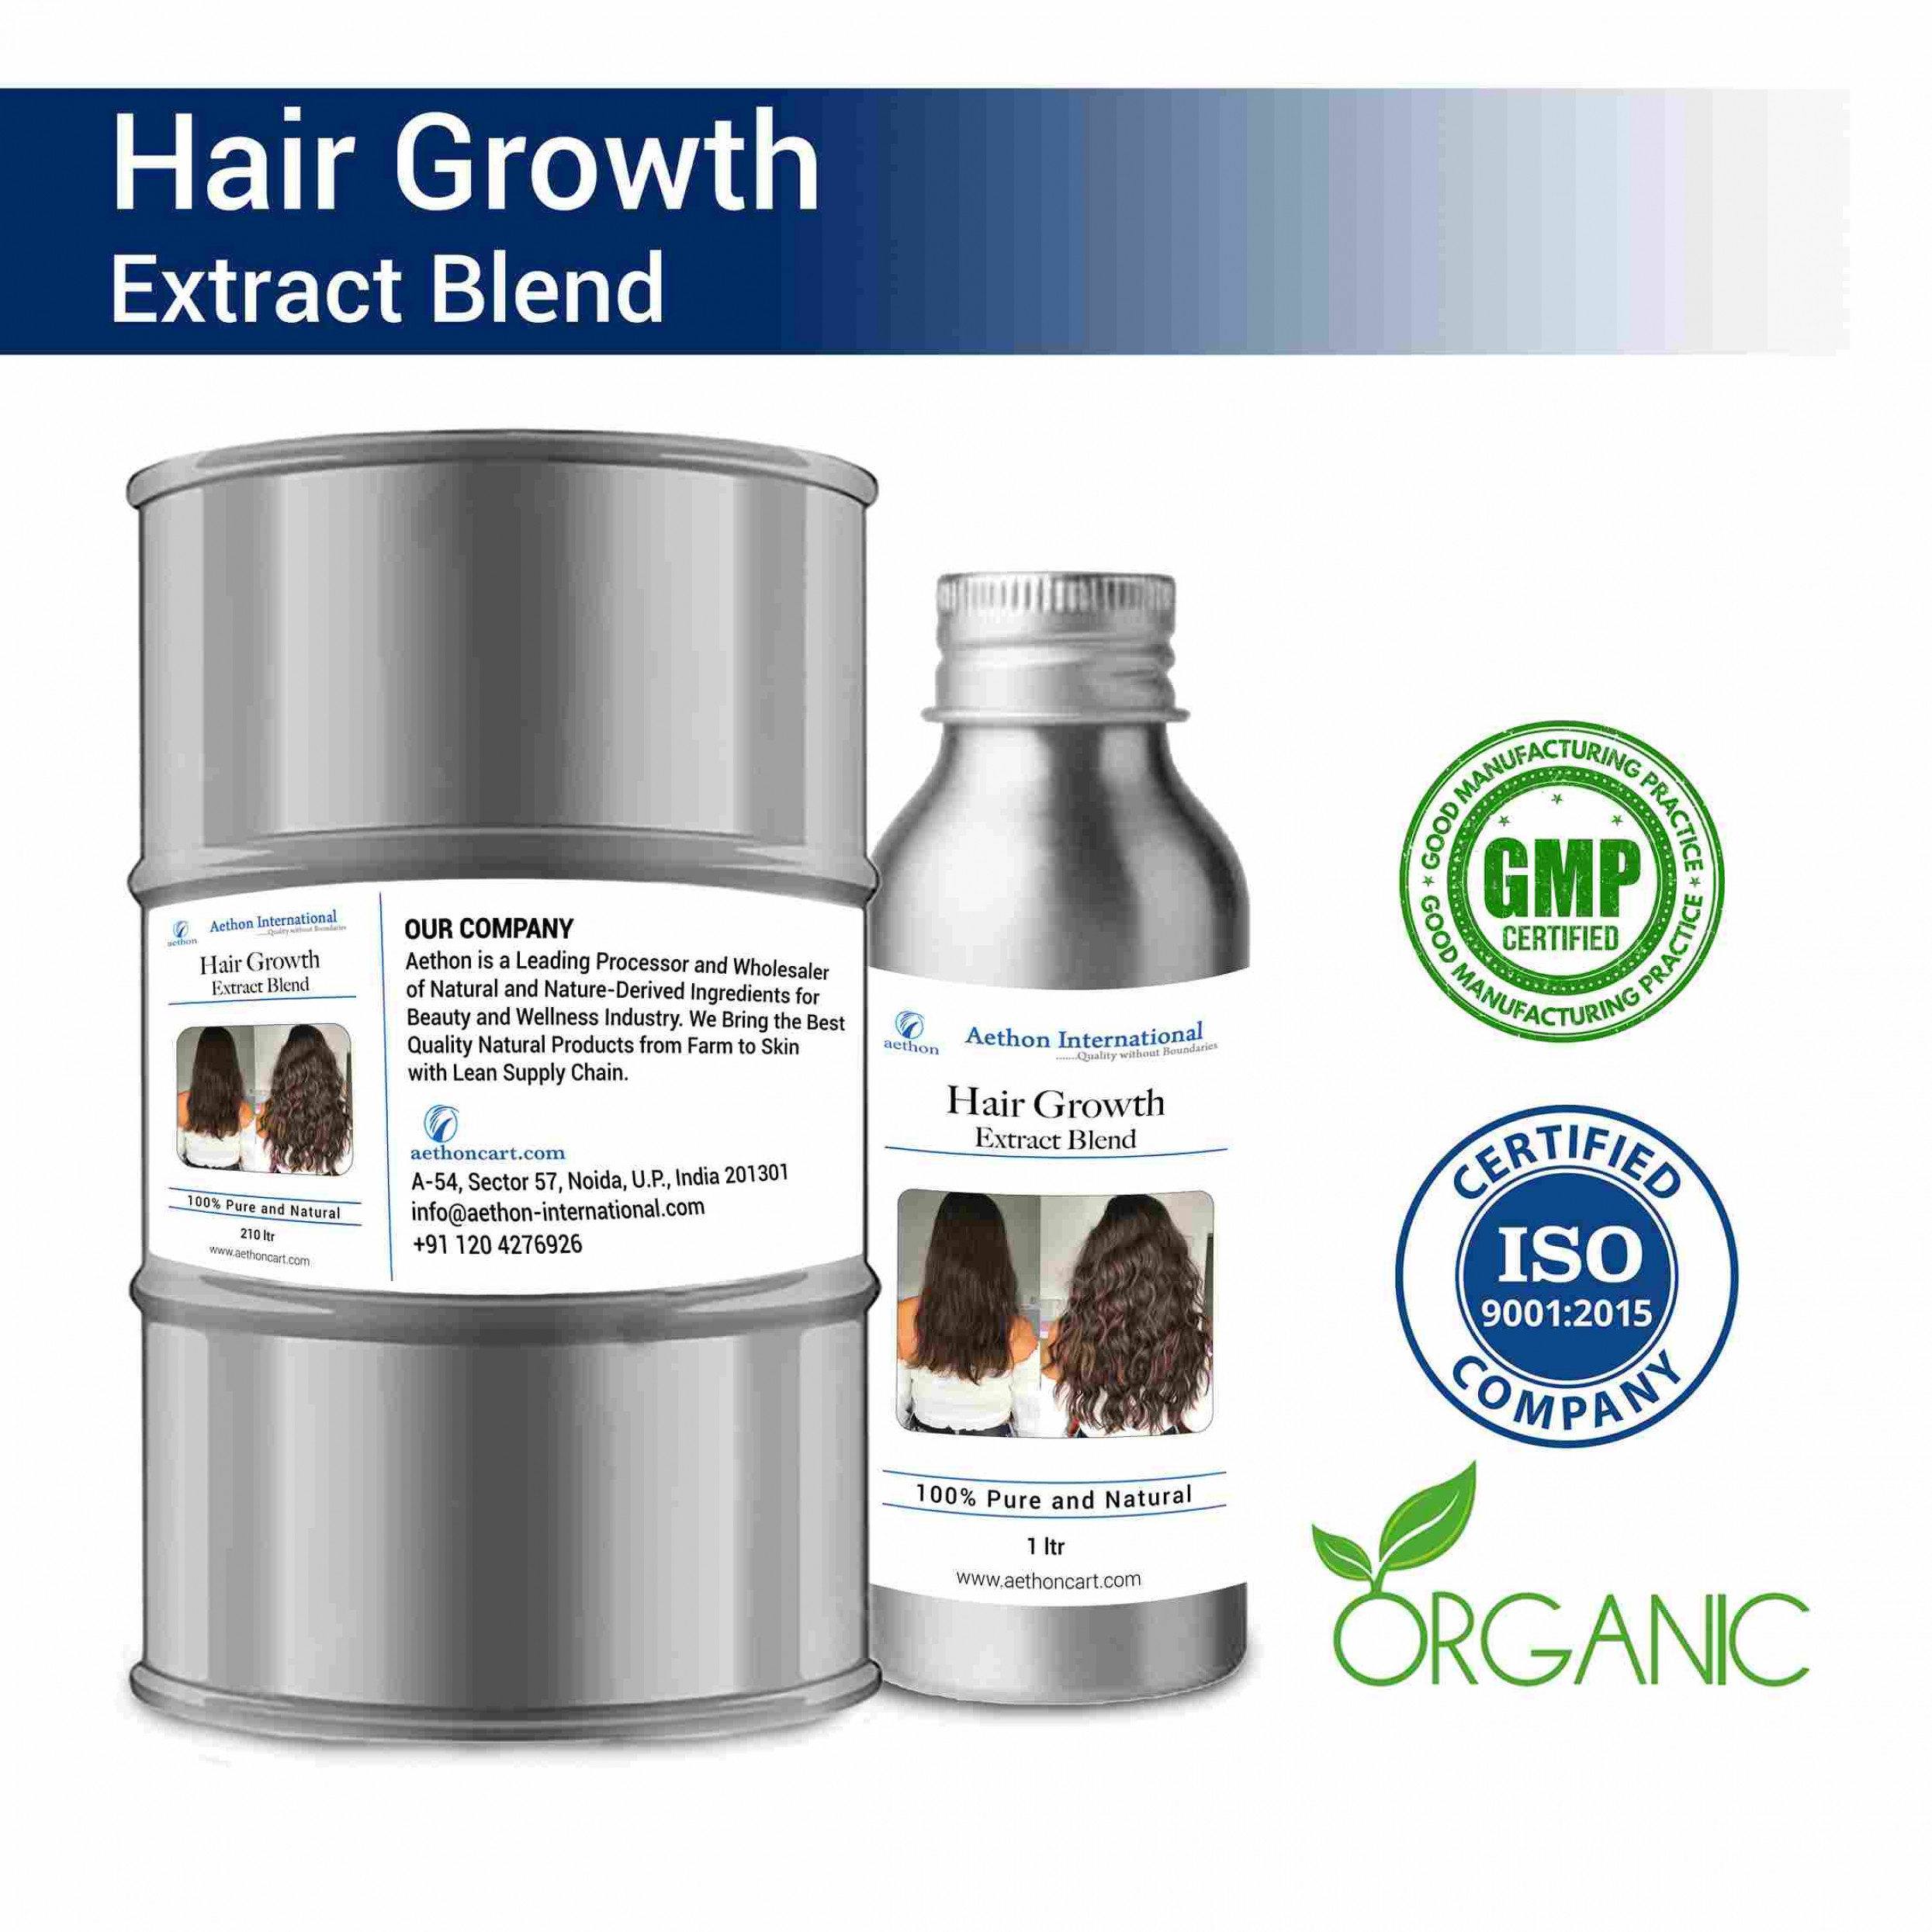 Hair Growth Extract Blend (Oil)